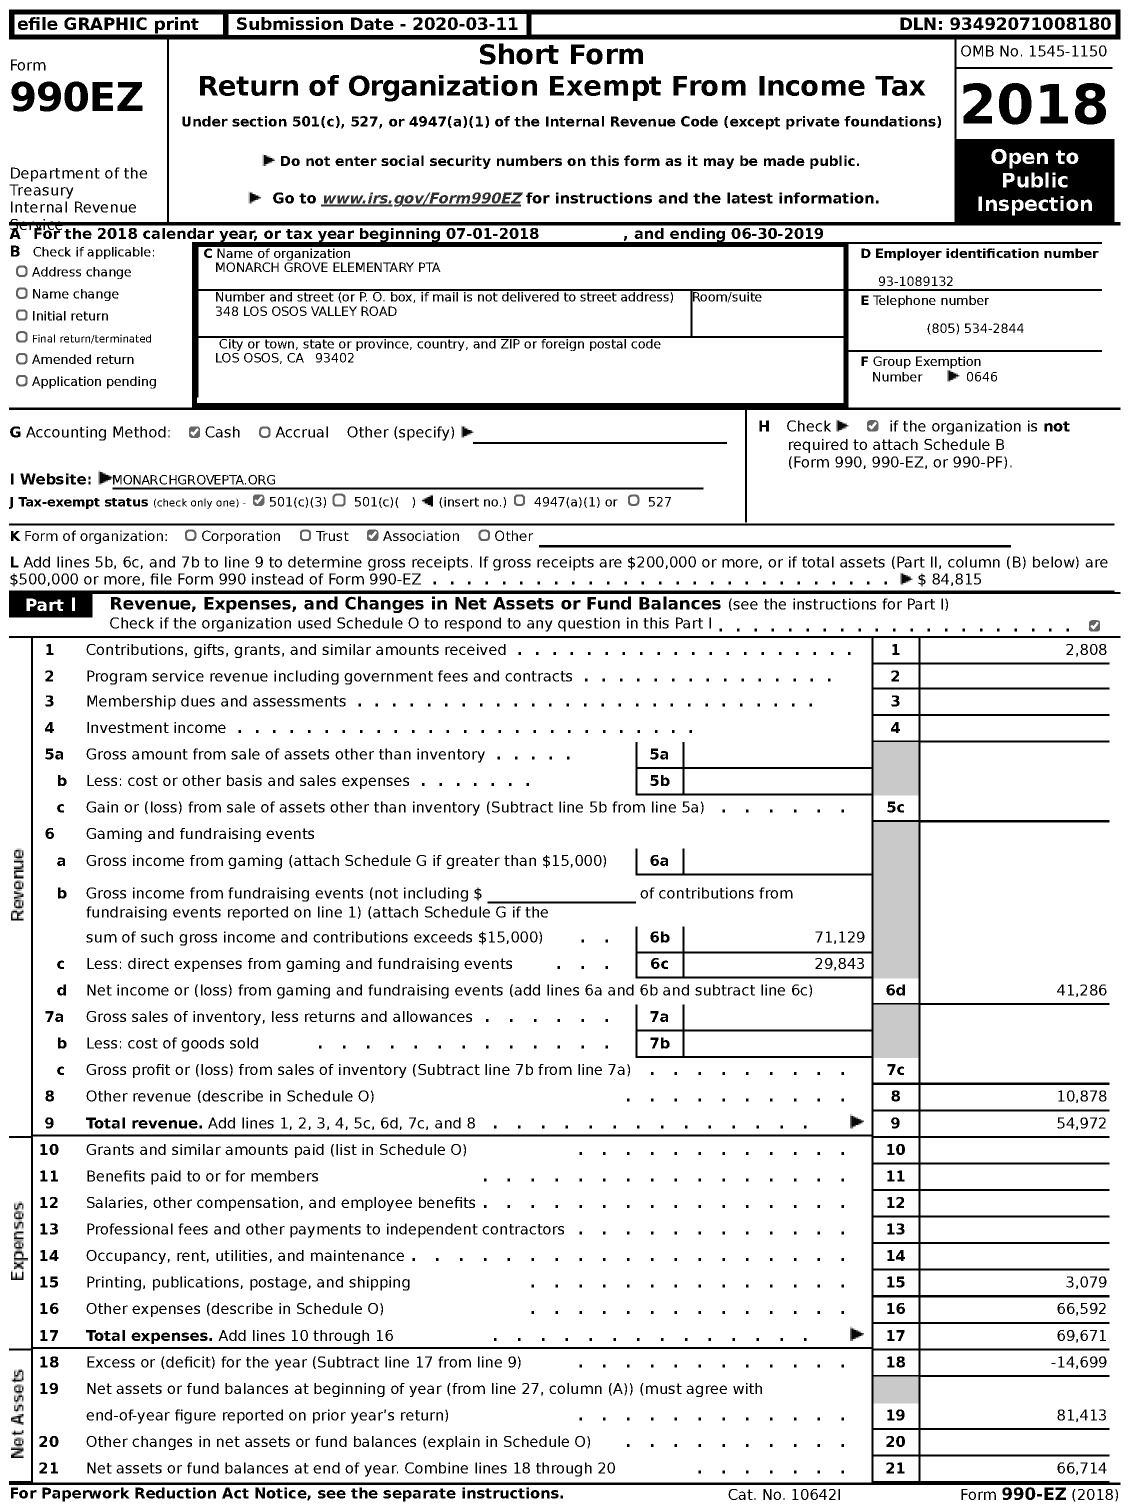 Image of first page of 2018 Form 990EZ for California State PTA - 4747 Monarch Grove Elementary PTA